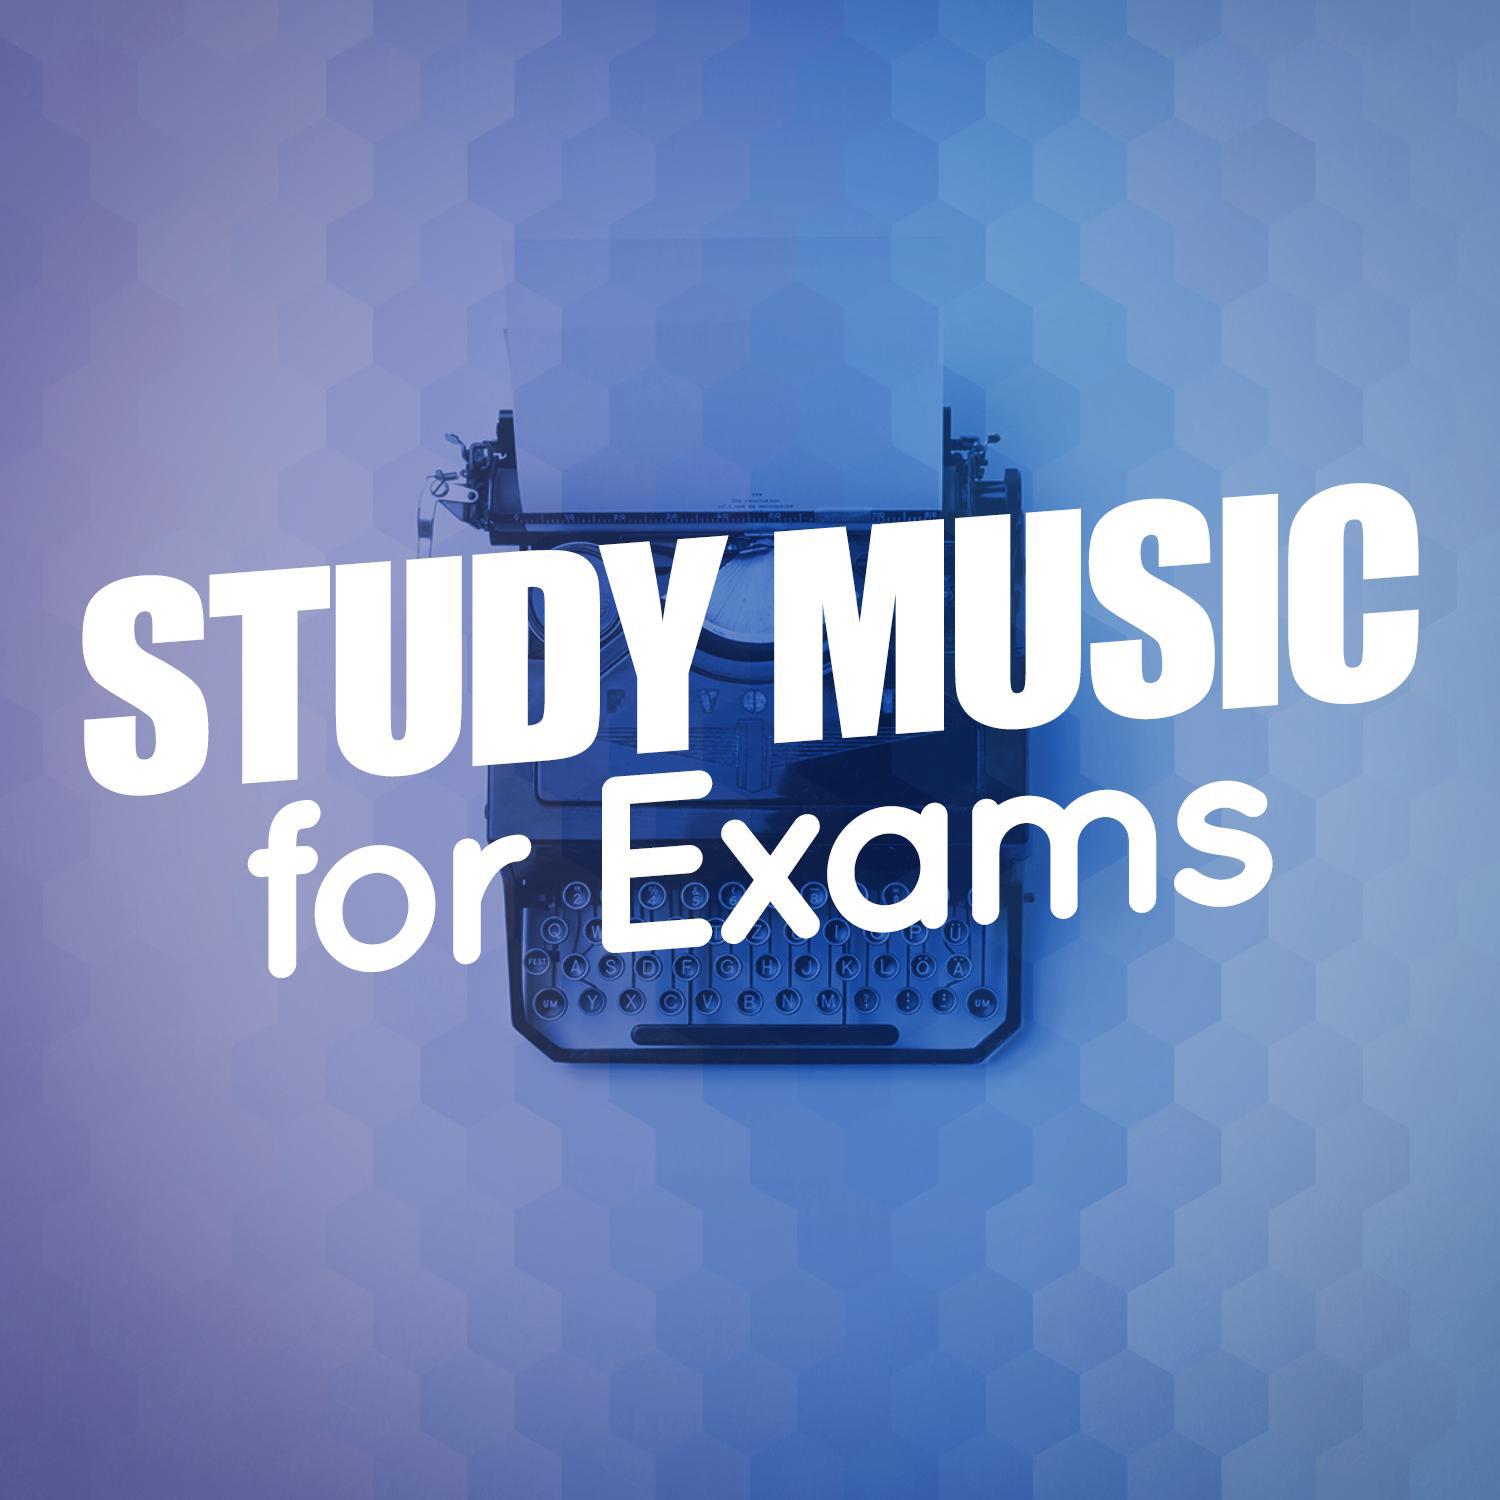 Study Music for Exams